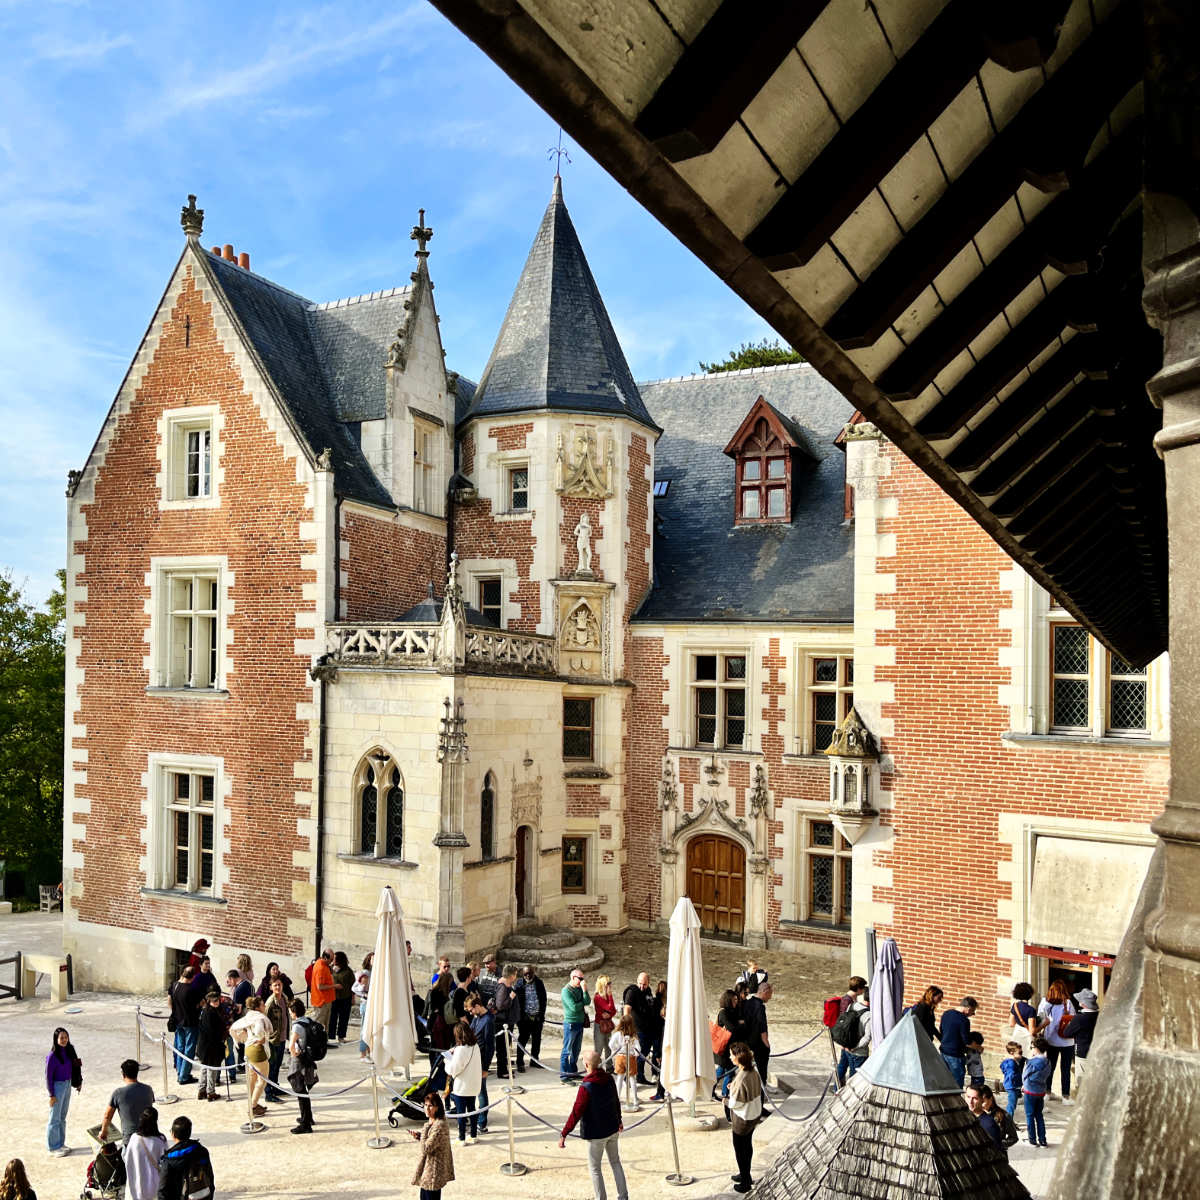 You are currently viewing Leonardo da Vinci’s Clos Lucé: Travel guide and history (Loire)